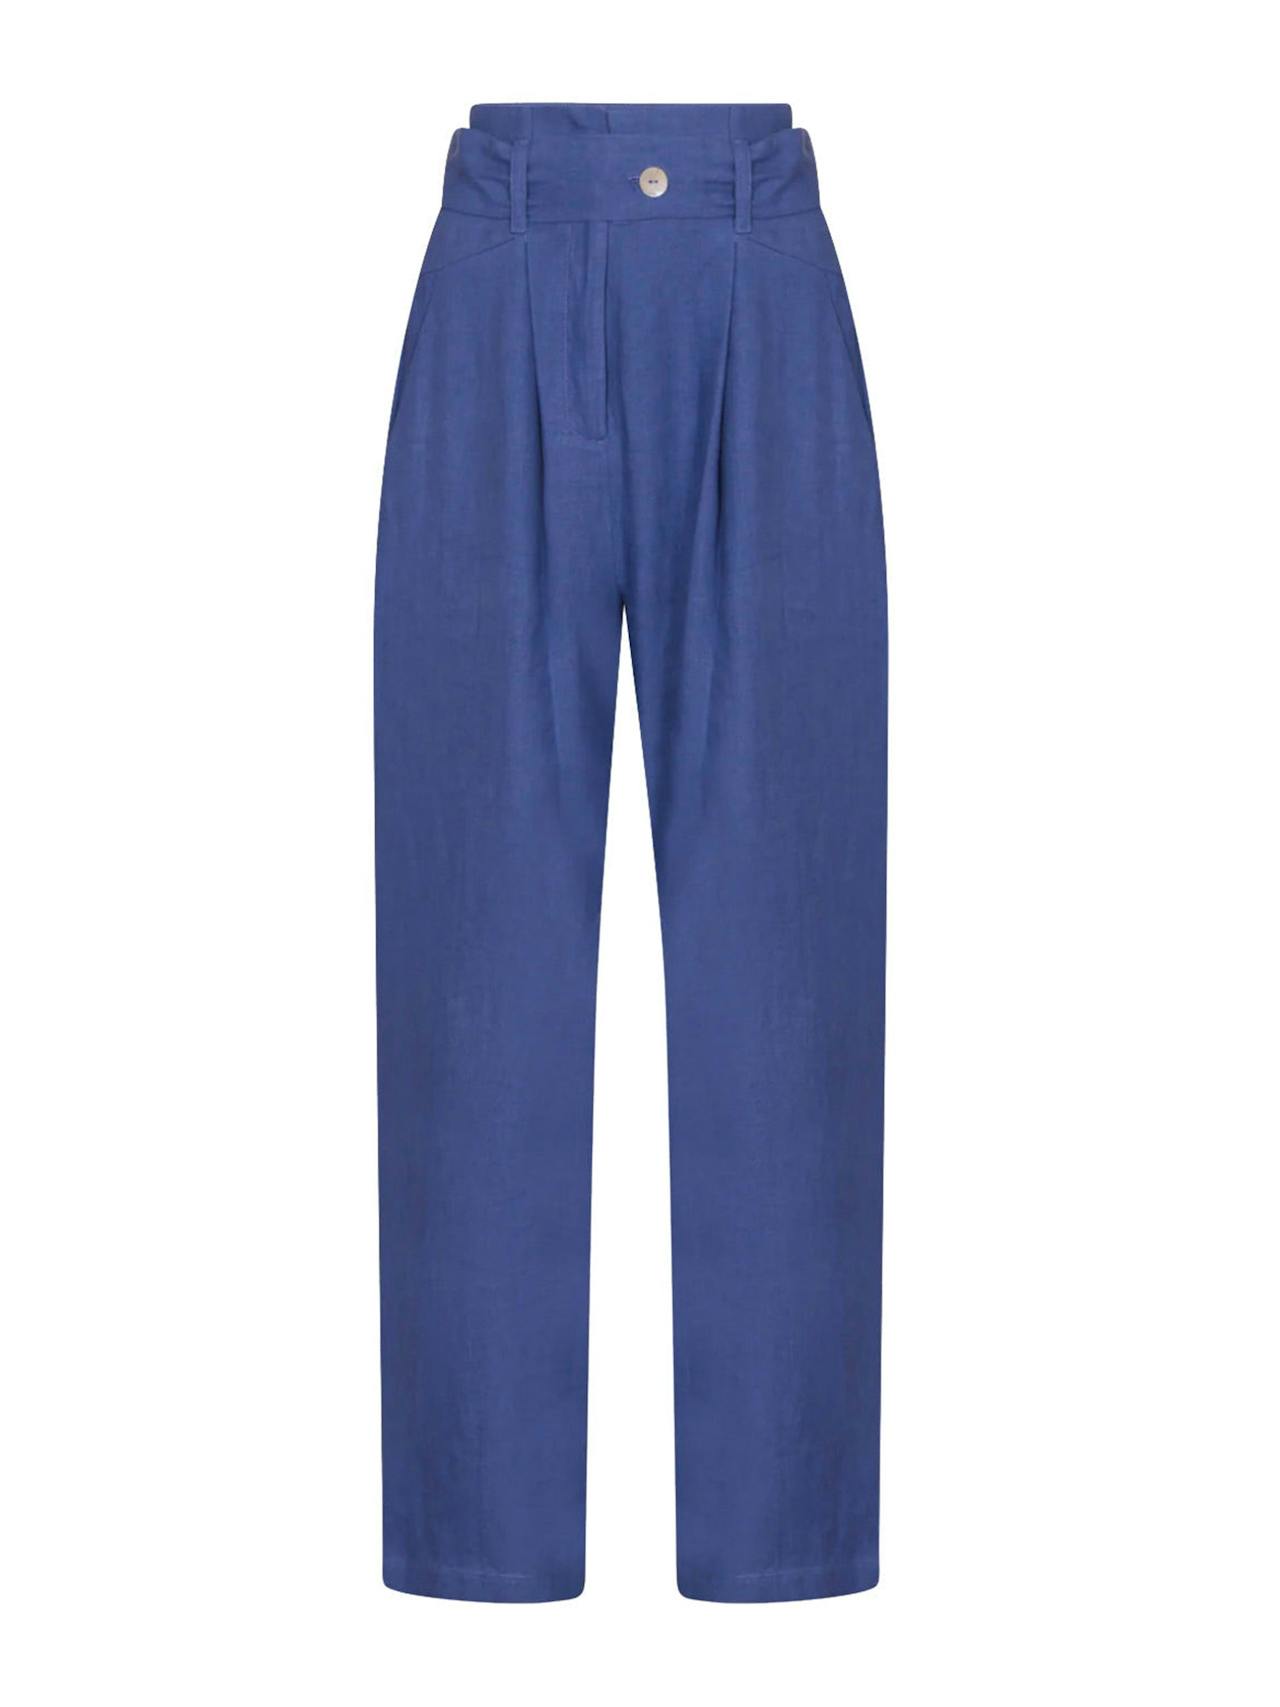 Klein blue Nomade suit trousers